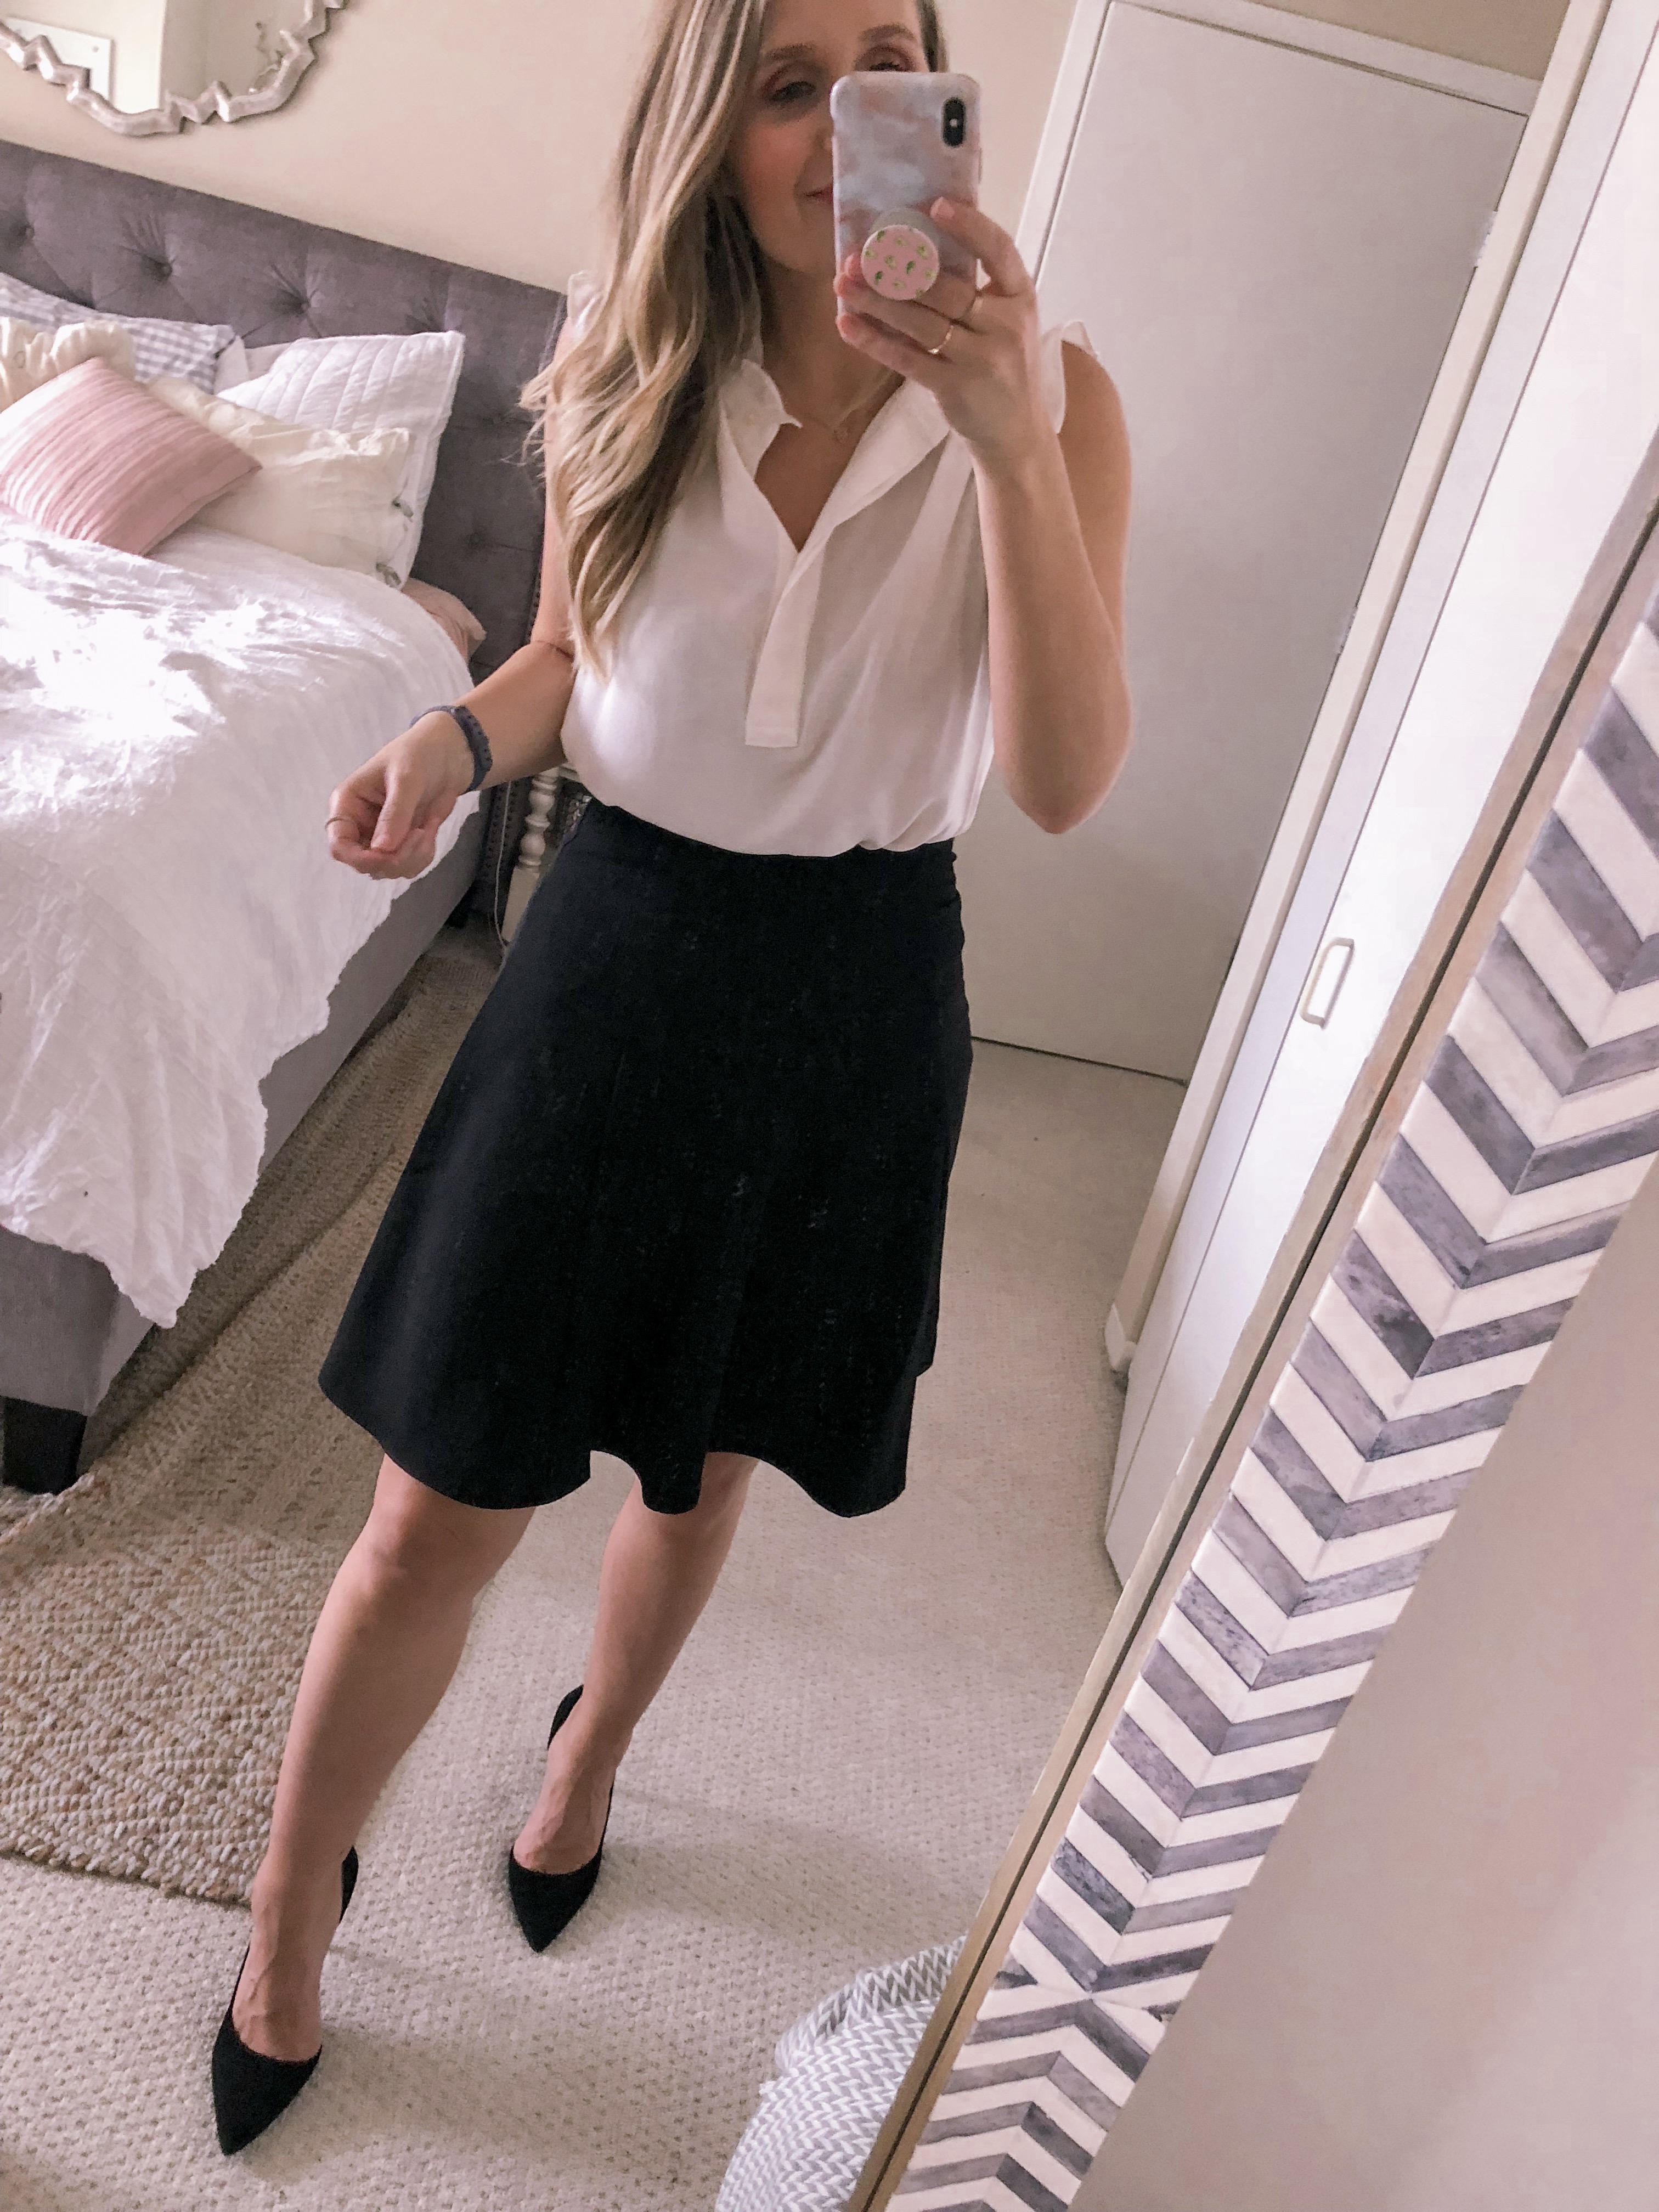 Chicago fashion blogger Visions of Vogue wears a white ruffle LOFT tank top with a CeCe black A-line skirt and black suede pumps for an office outfit idea.